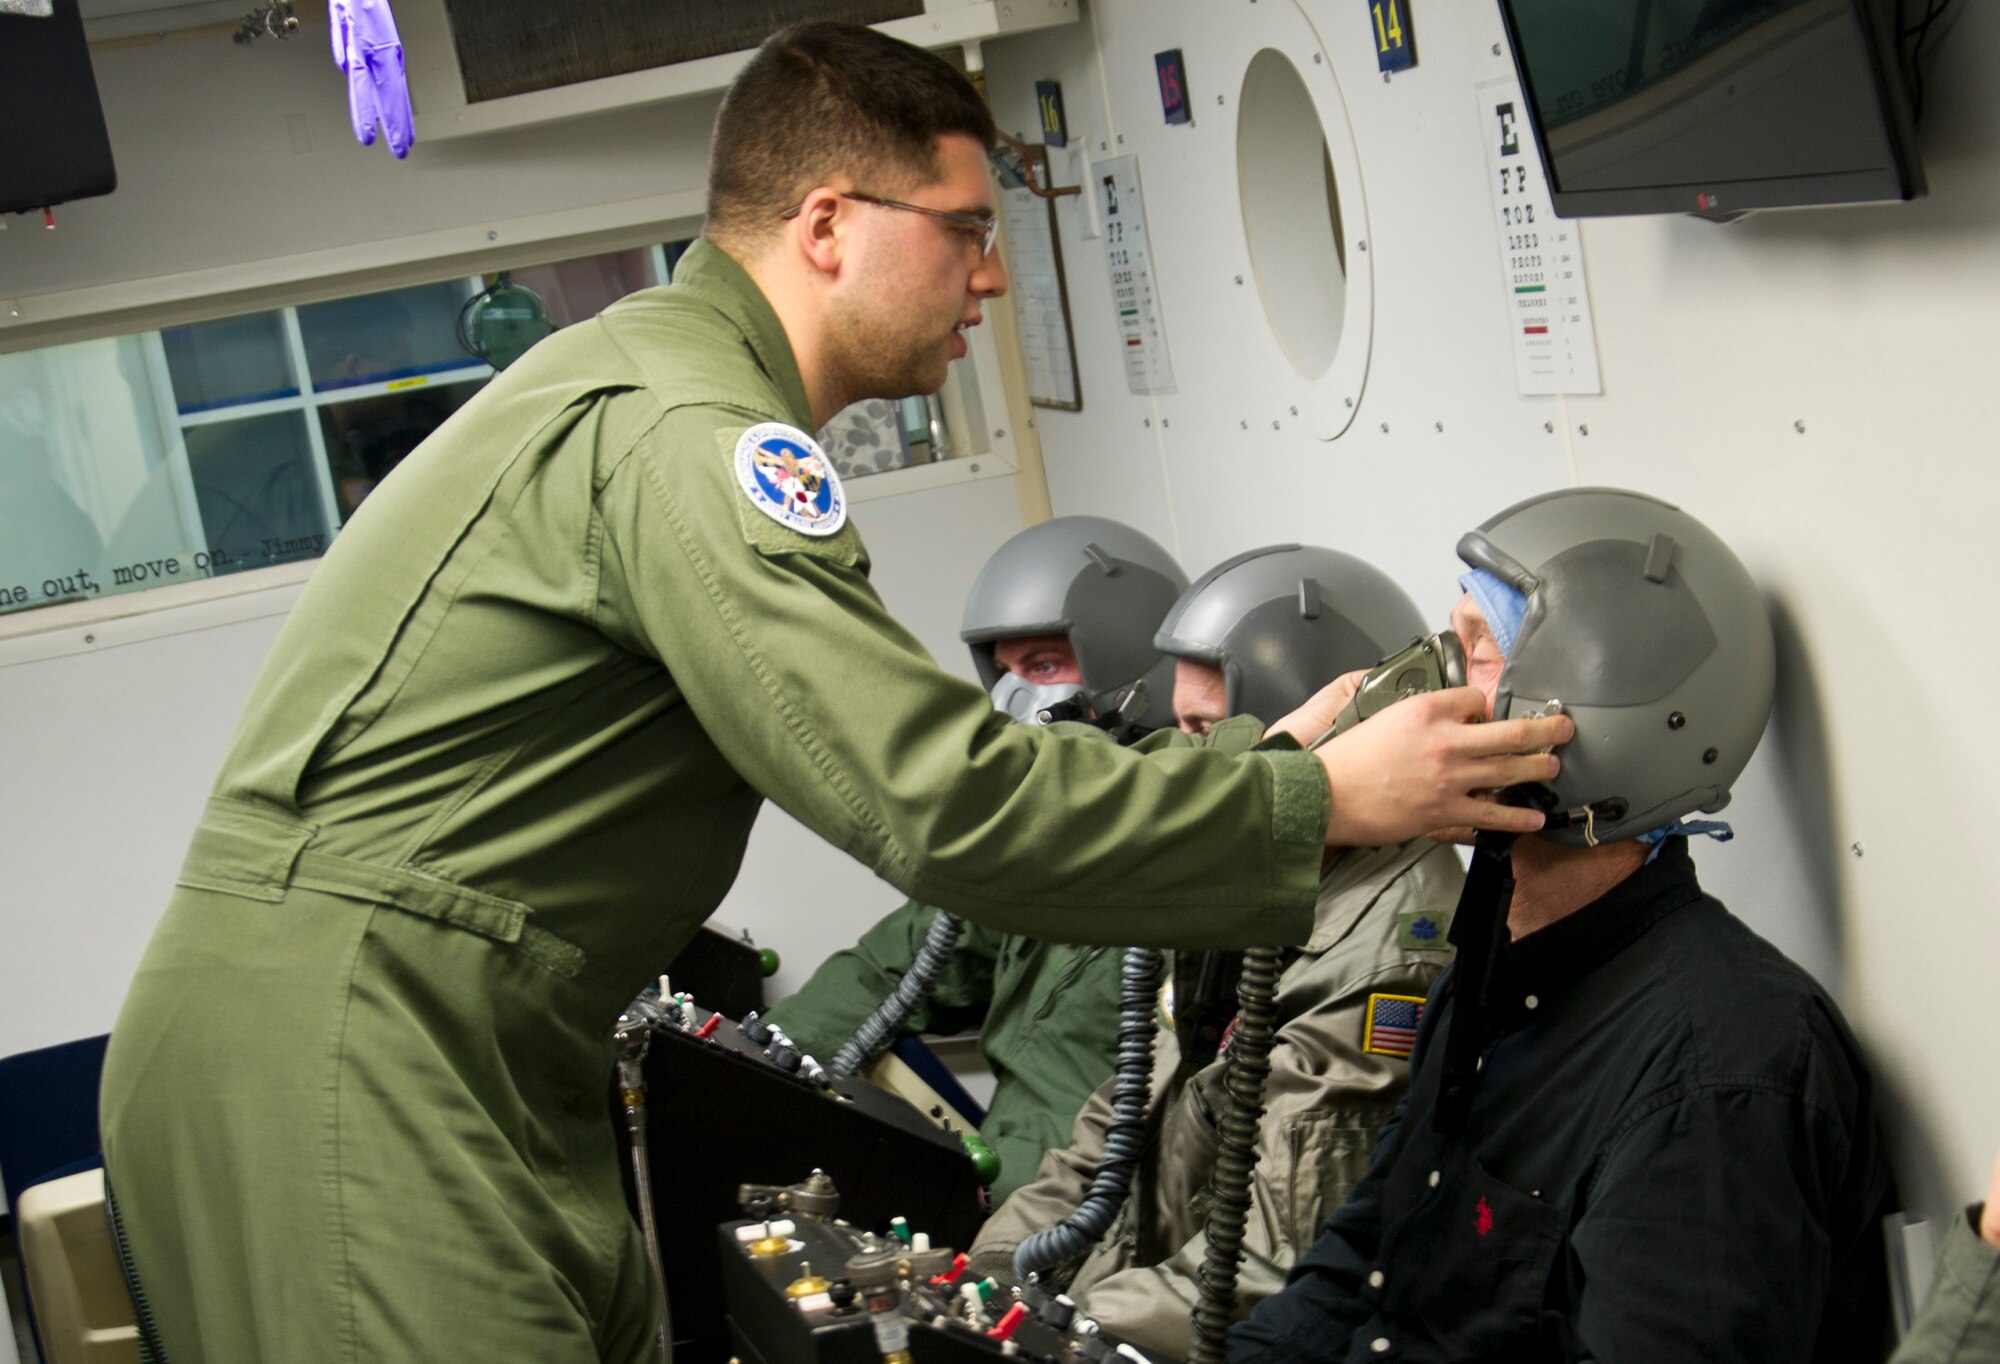 Senior Airman Christopher Connolly, 779th Aerospace Medical Squadron physiologist, assists David Kinsella with sealing his oxygen mask inside an altitude simulator chamber March 16, 2017, at Joint Base Andrews, Md. As an inside observer, Connolly was nearby to assist if Kinsella or the other students had physiological complications while experiencing varying levels of air pressure. (U.S. Air Force photo by Staff Sgt. Joe Yanik)